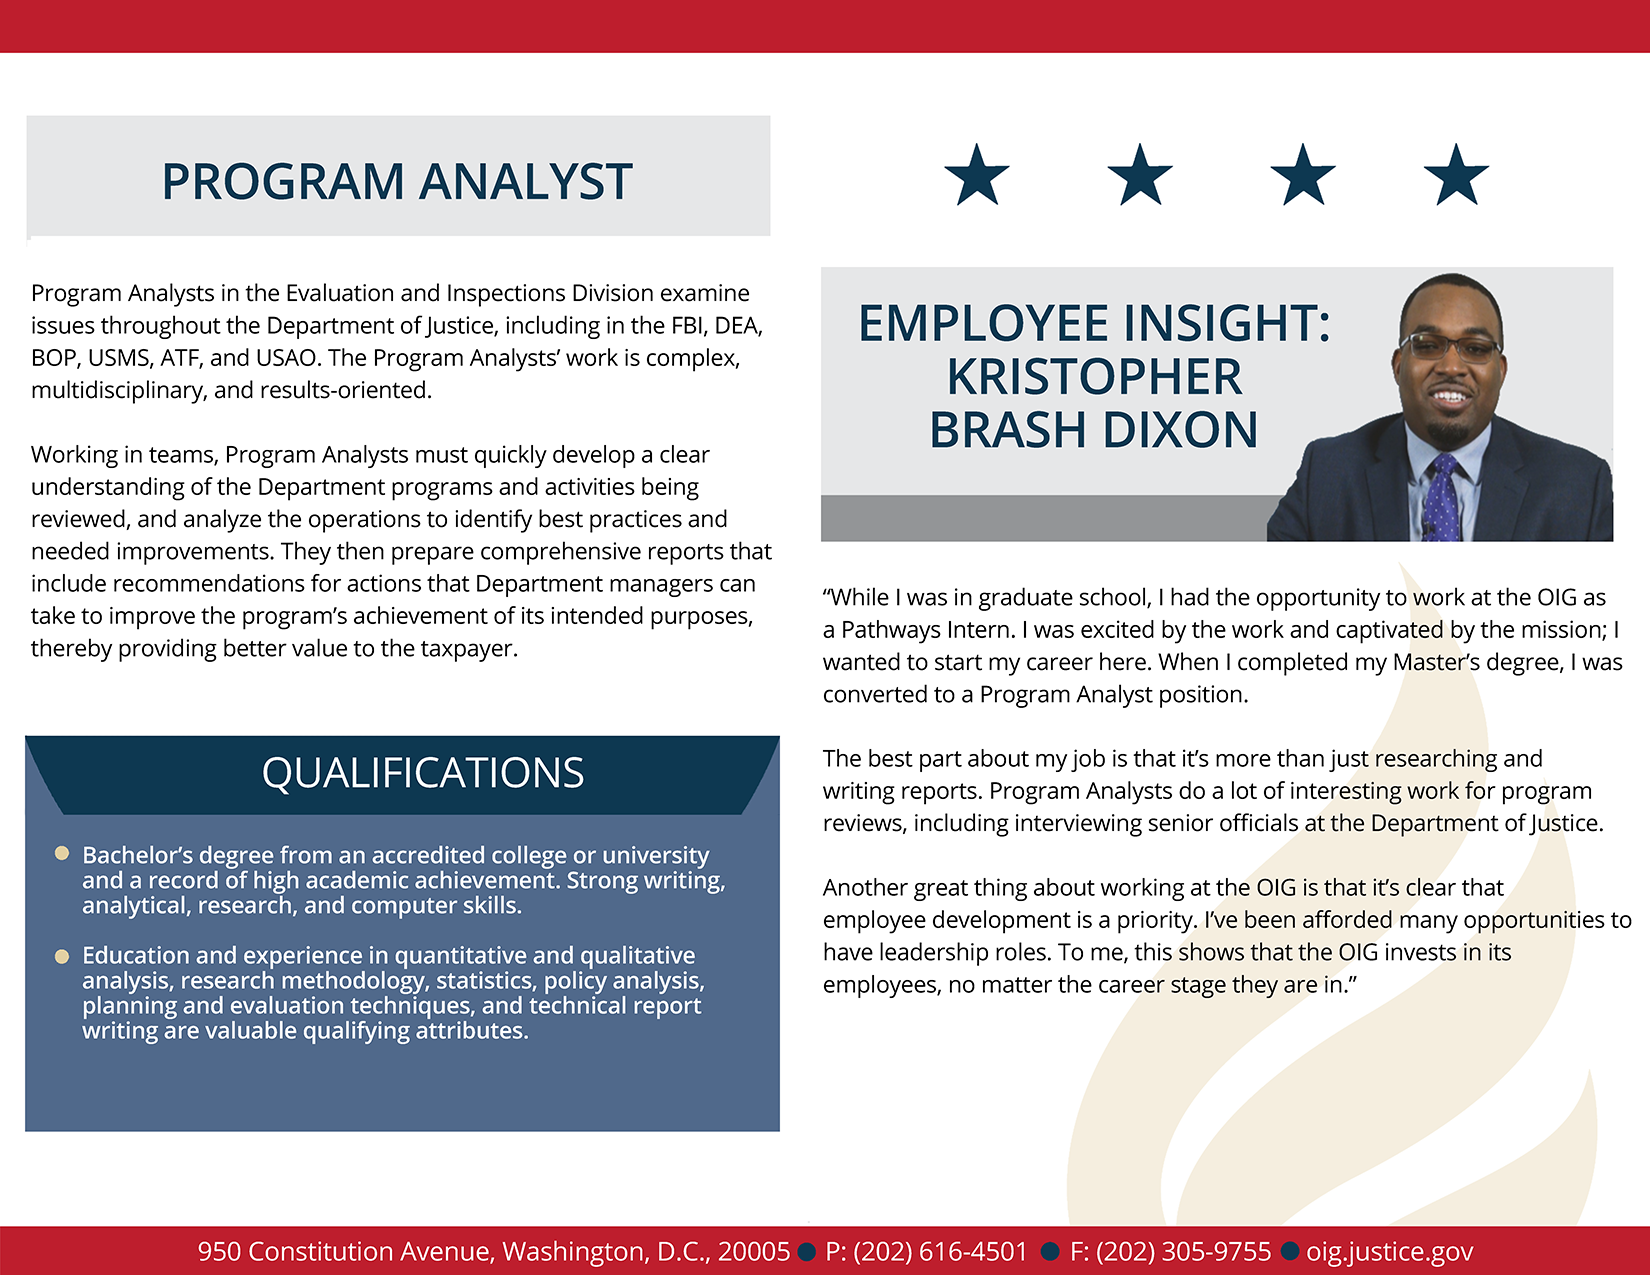 Learn more about the analyst employee experience